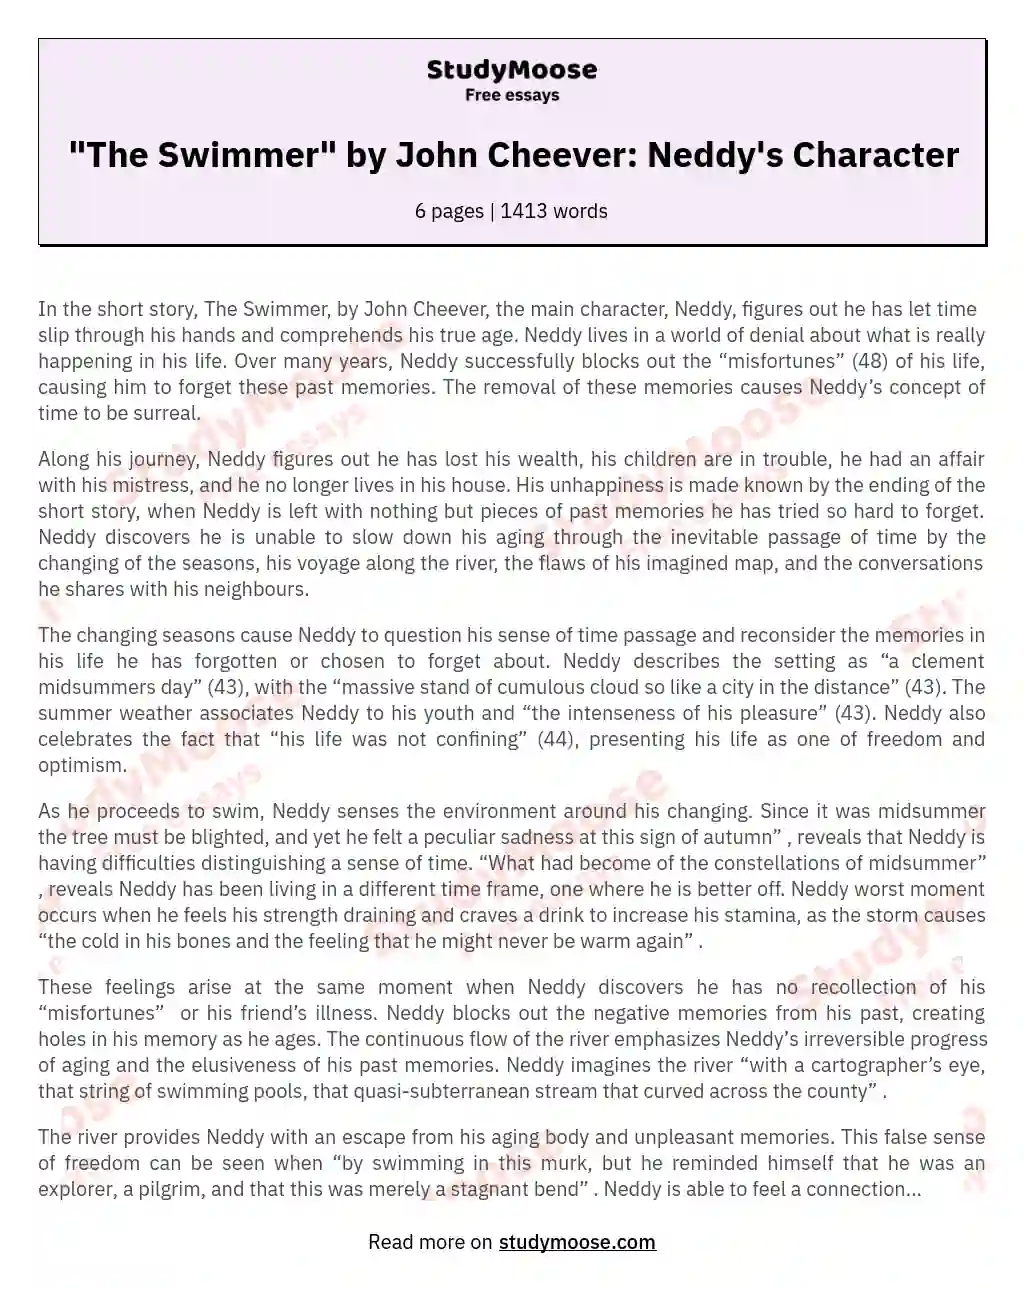 "The Swimmer" by John Cheever: Neddy's Character